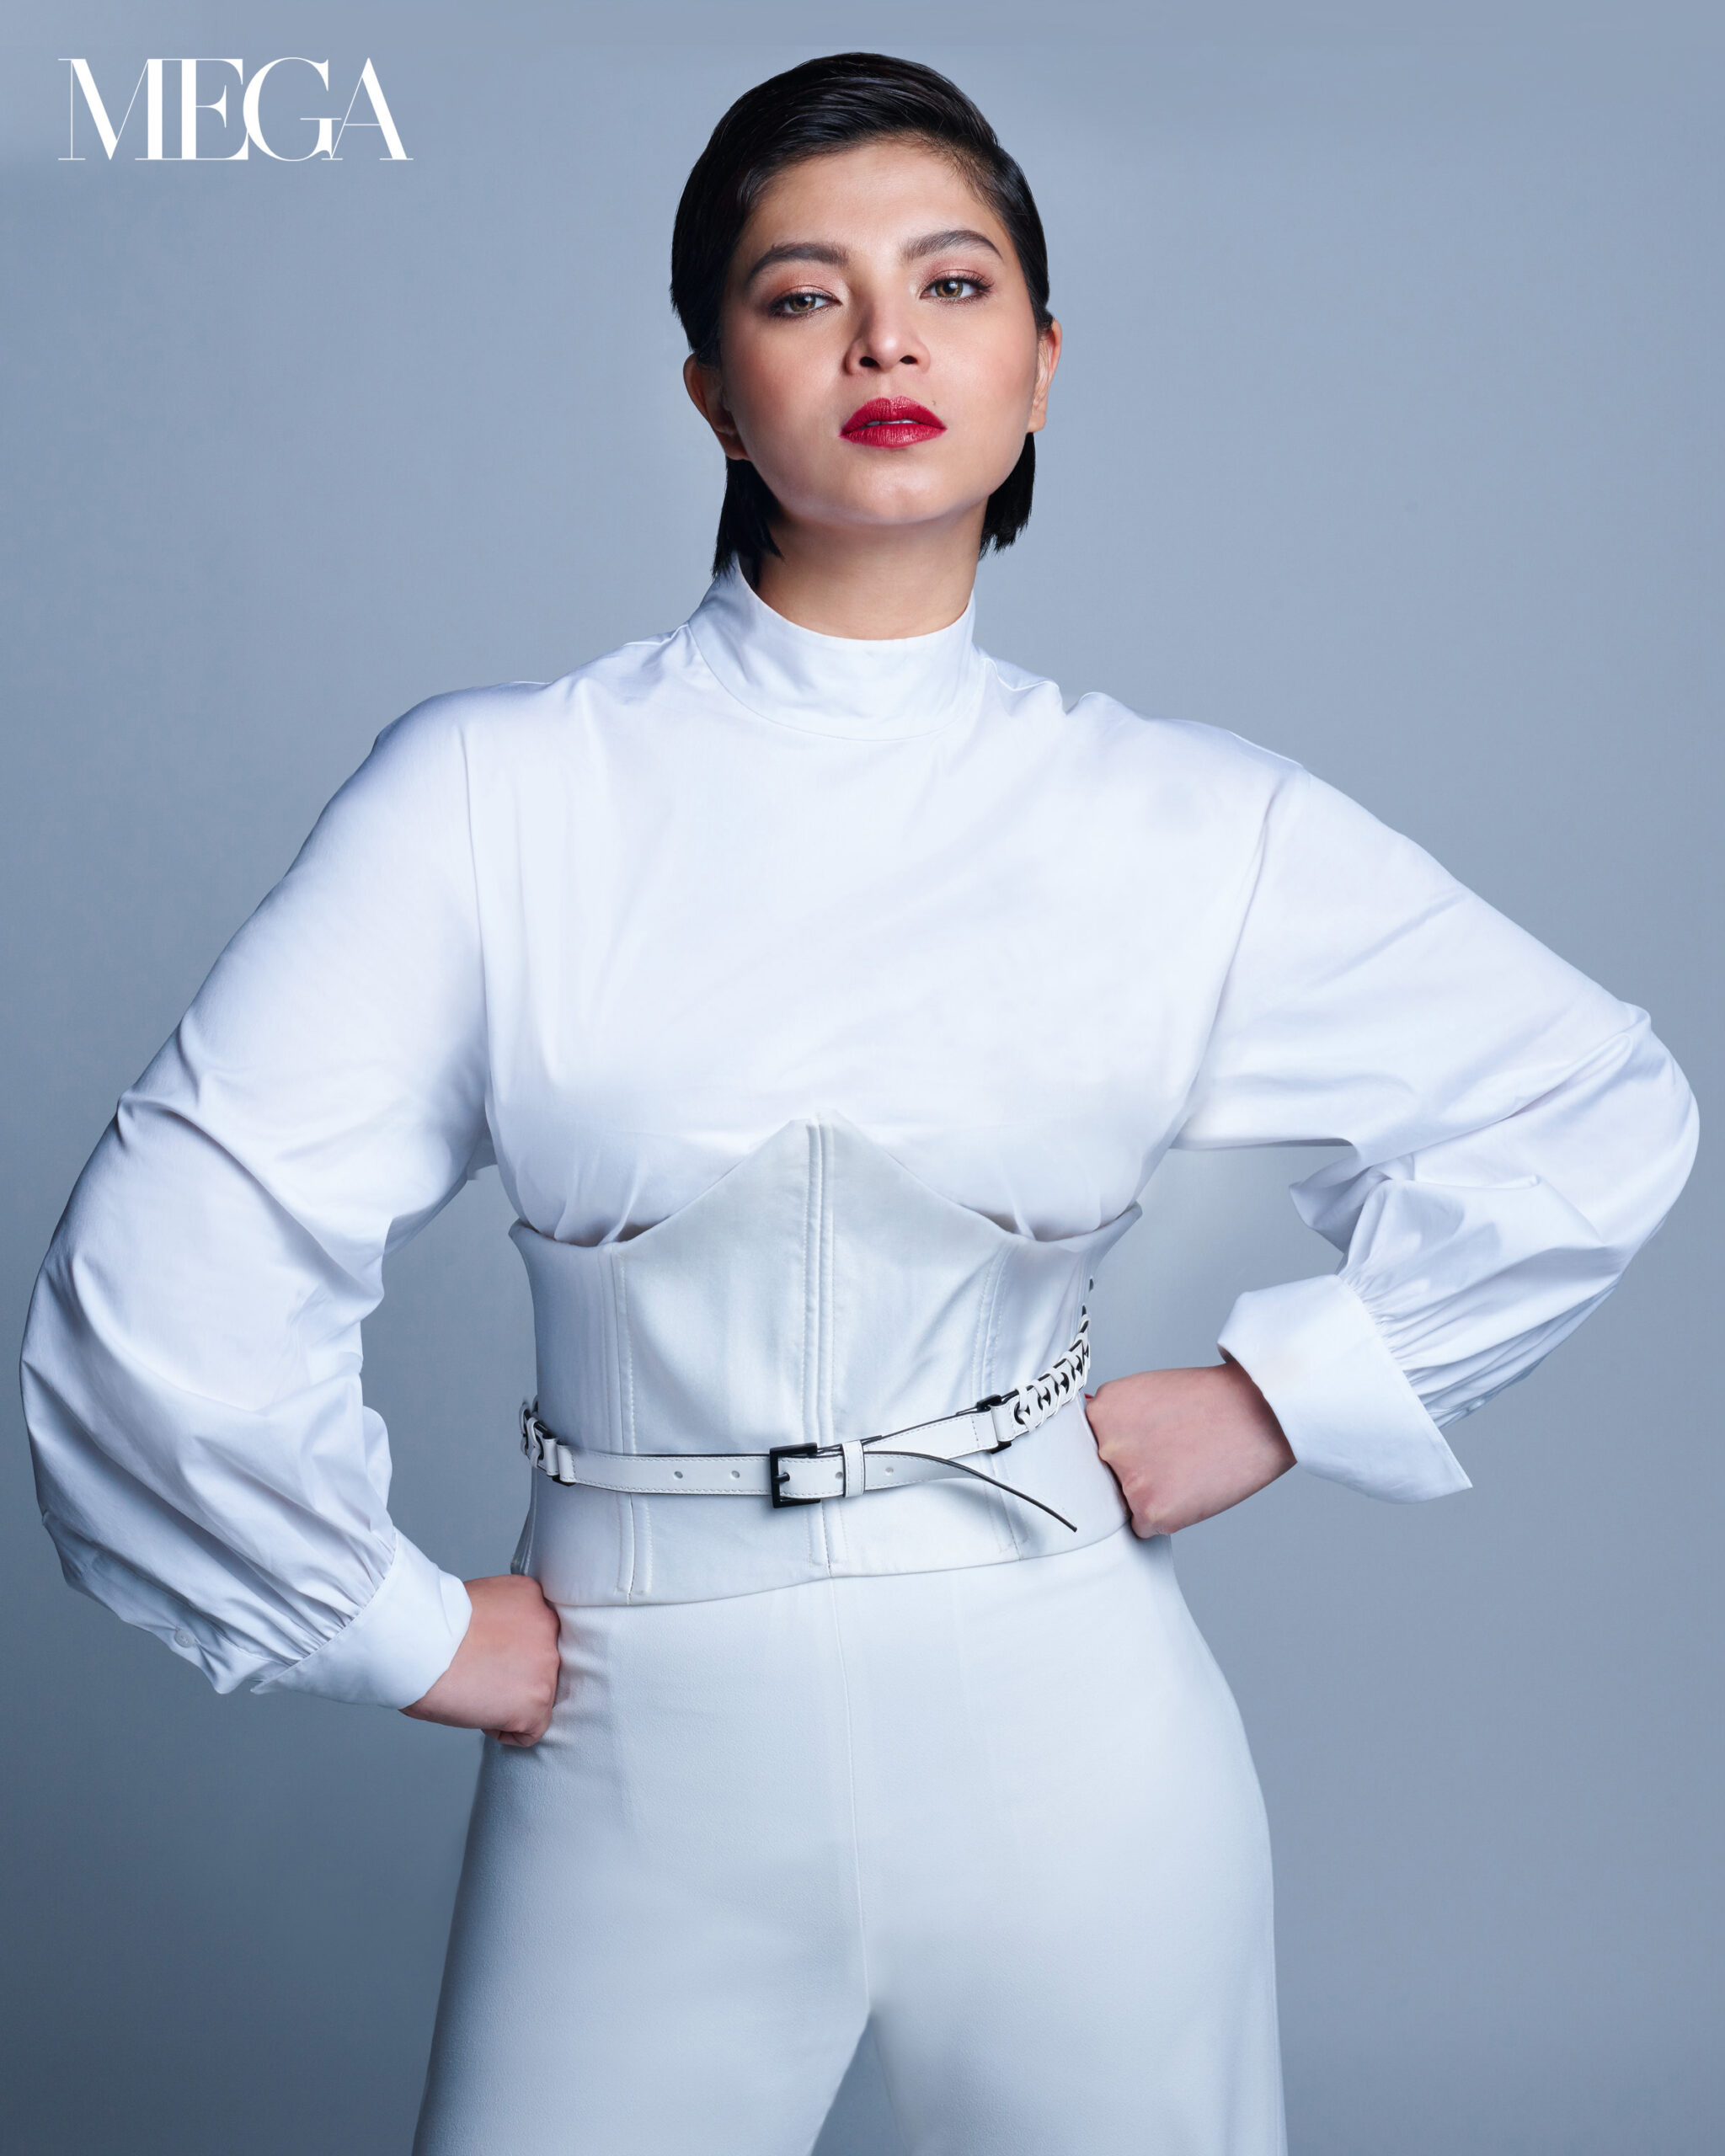 Bea Alonzo on Addressing Her Health Issues